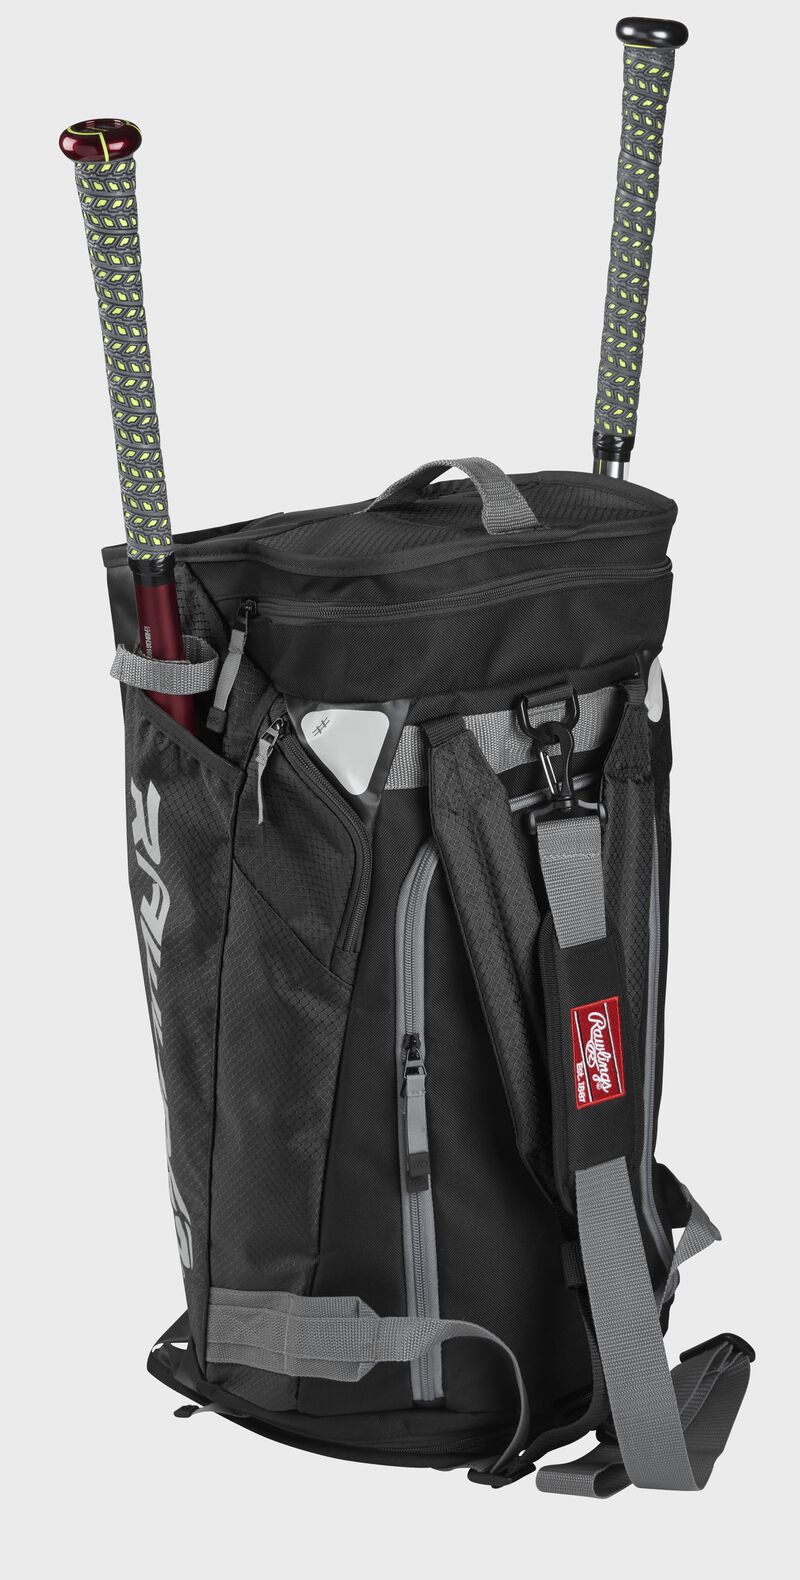 Angled view of upright Hybrid Backpack/Duffel Players Bag with baseball bats - SKU: R601